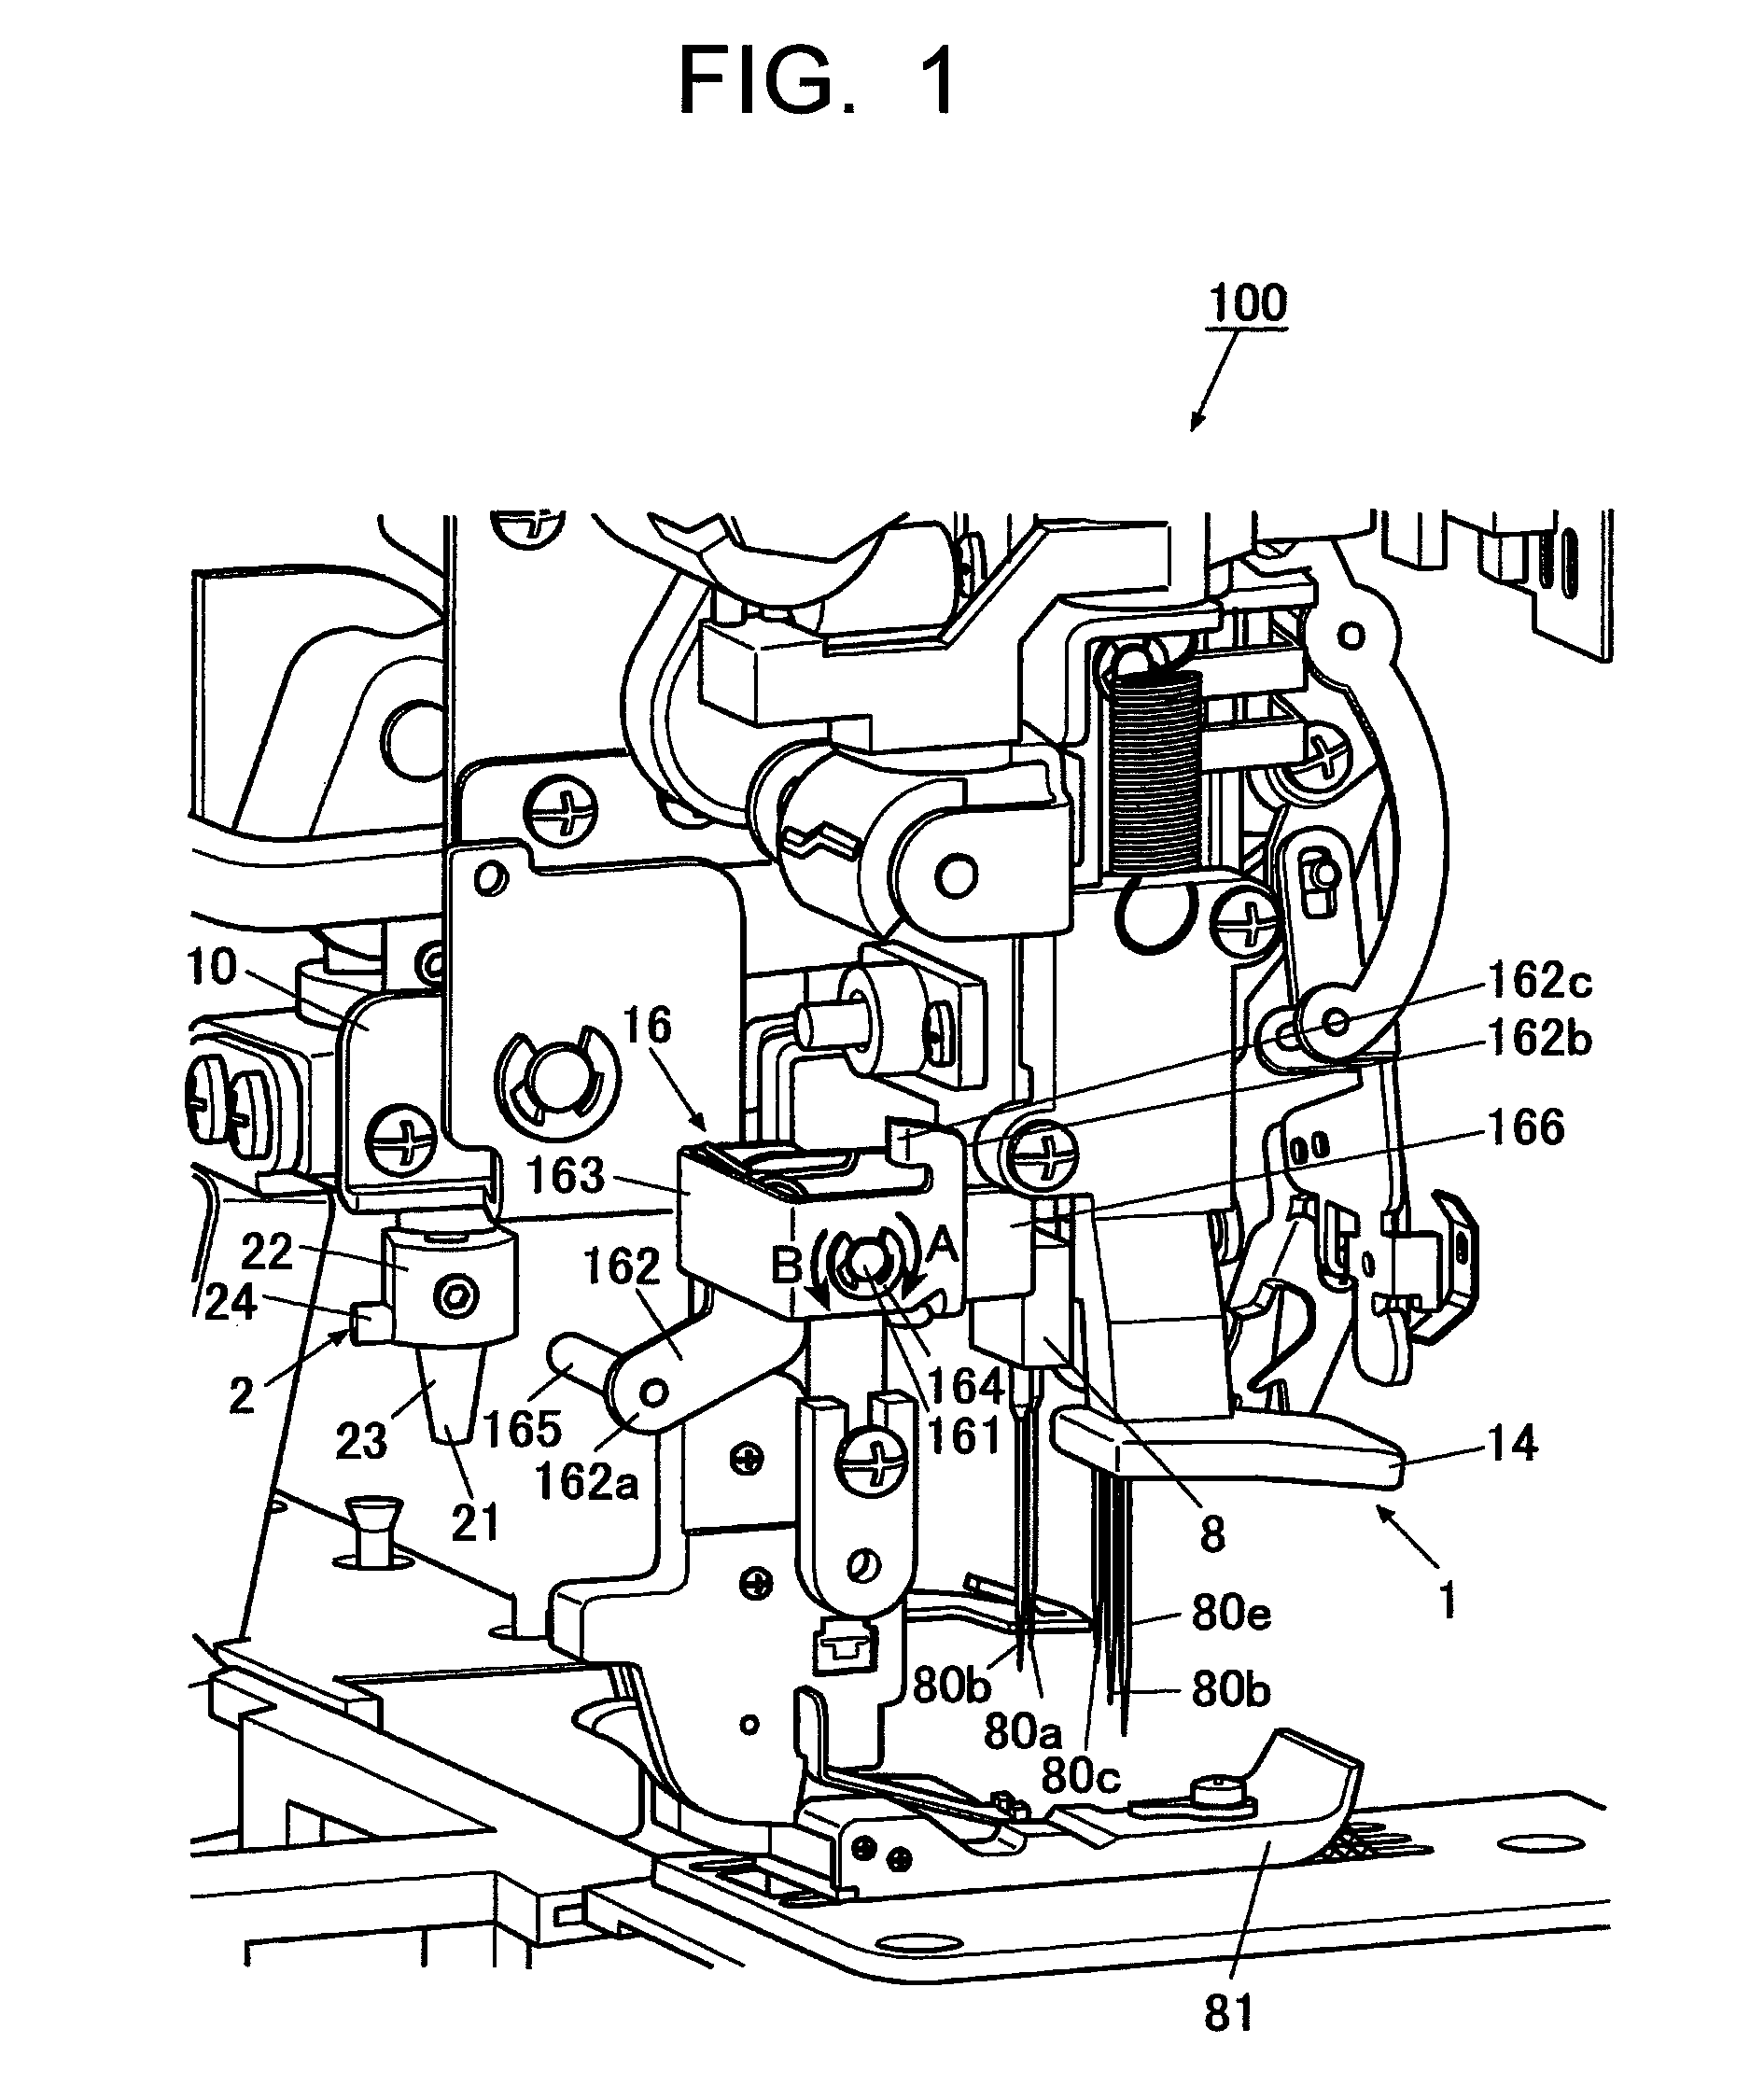 Threading device of sewing machine